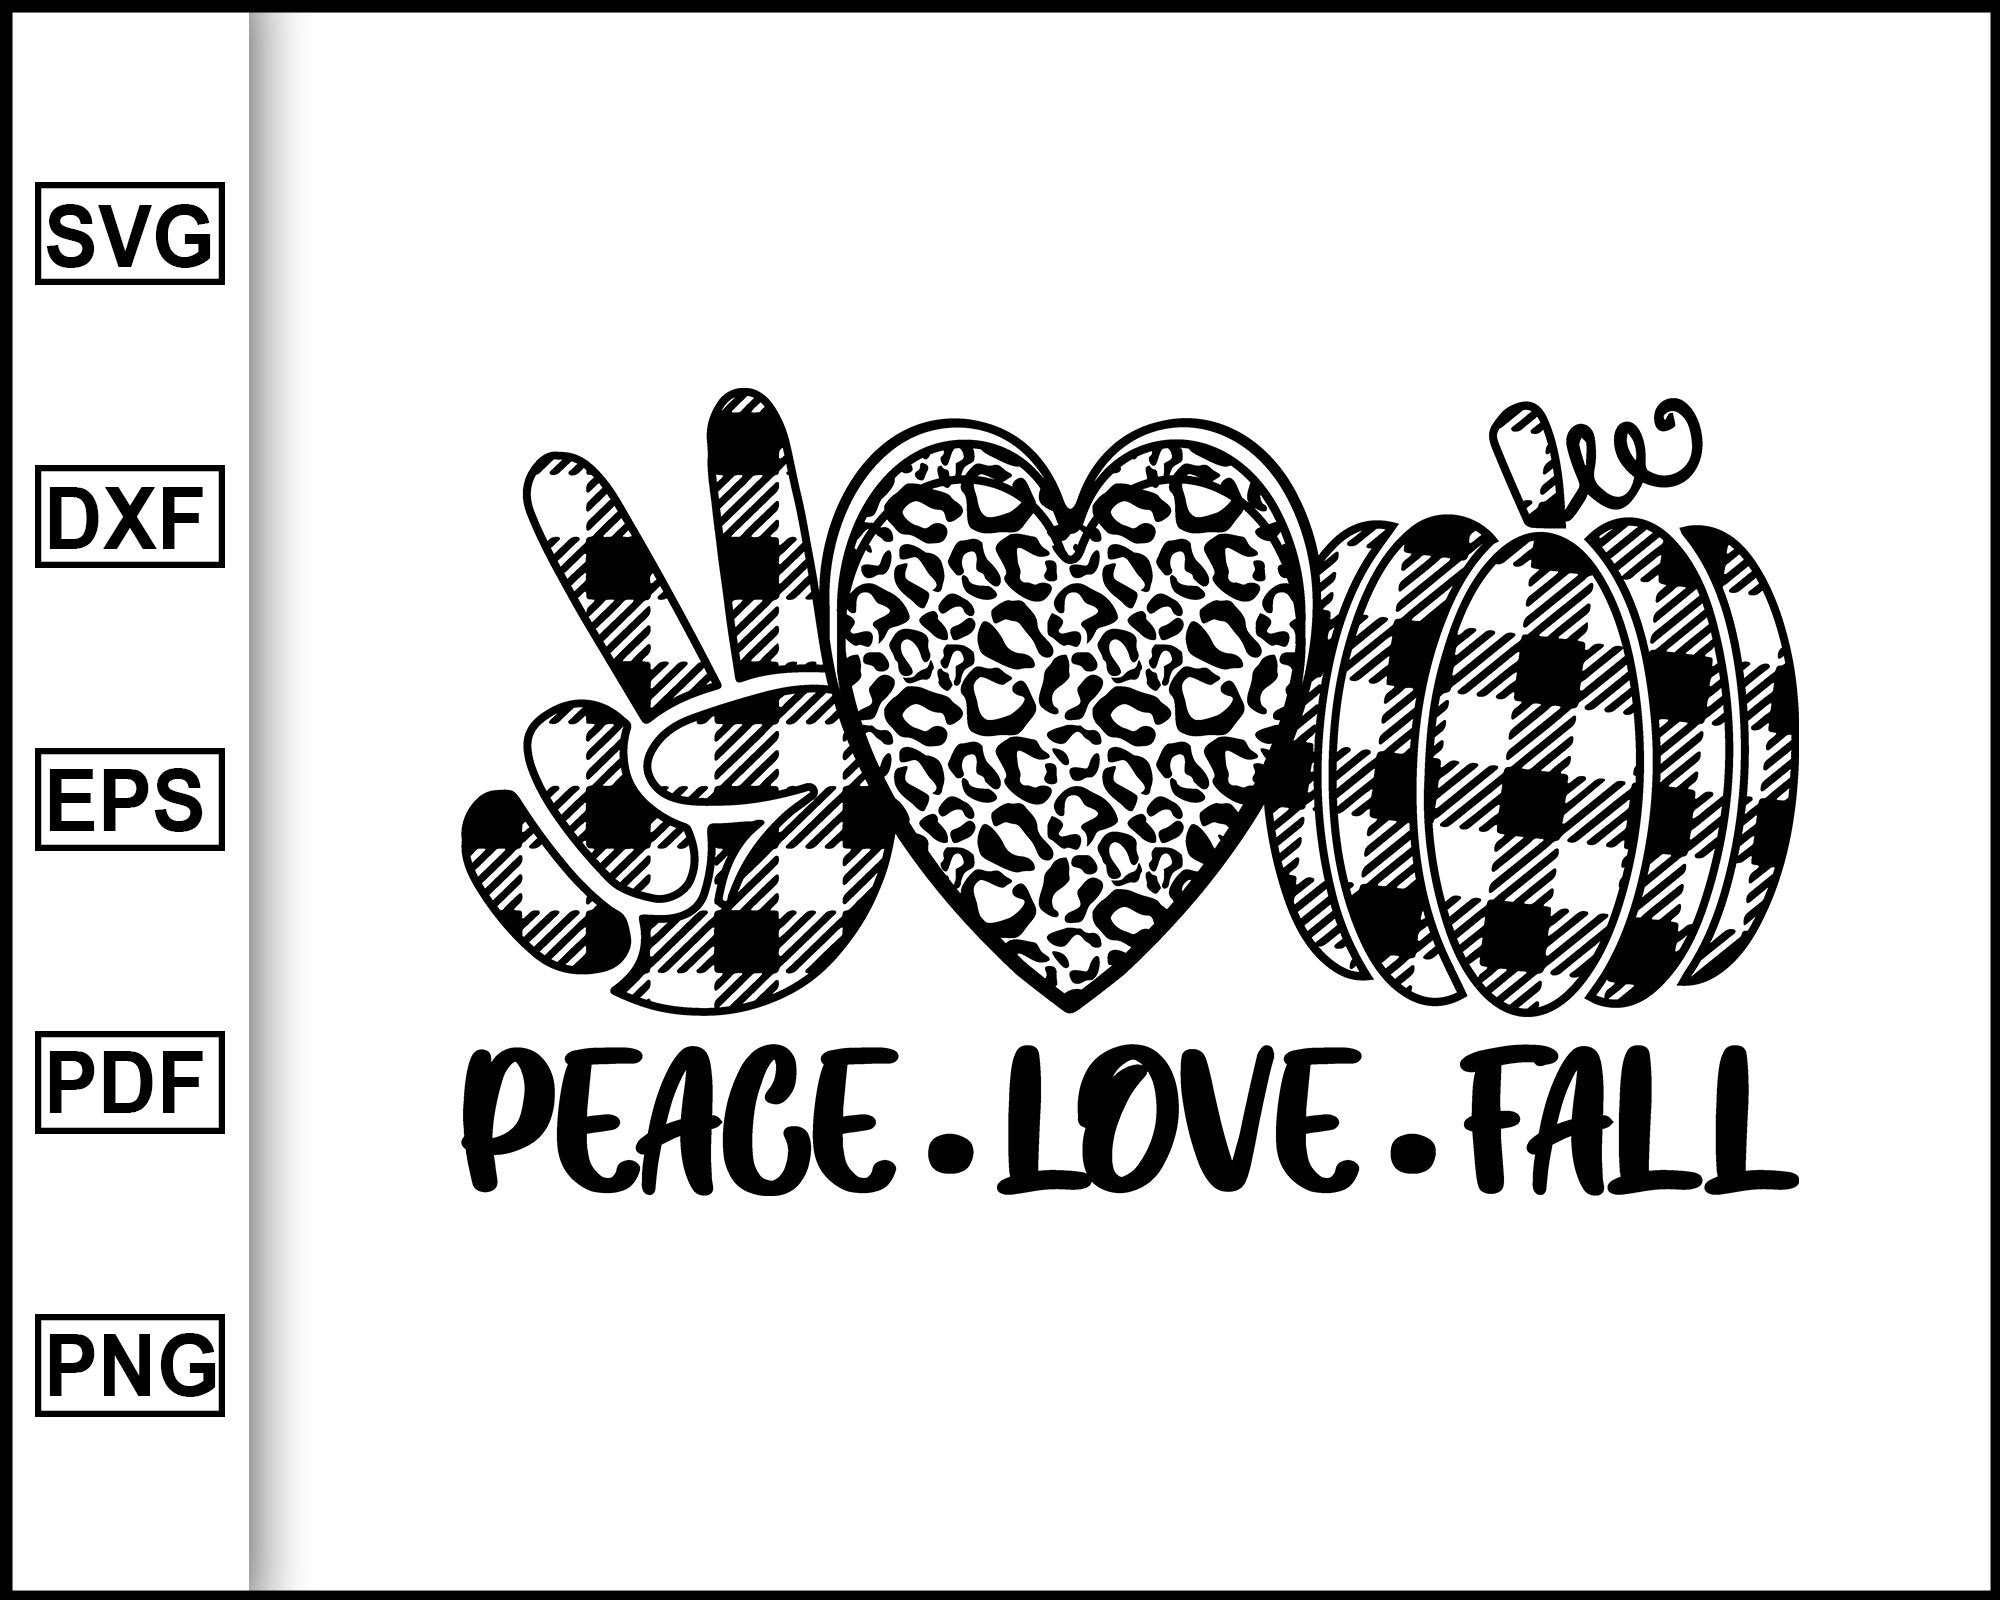 Download Peace Love Halloween Fall Love Halloween Svg Peace Love Cut File Peace Svg Love Svg Skeleton Autumn Clipart Cut Cutting Dxf Eps Cut Png Card Making Stationery Craft Supplies Tools